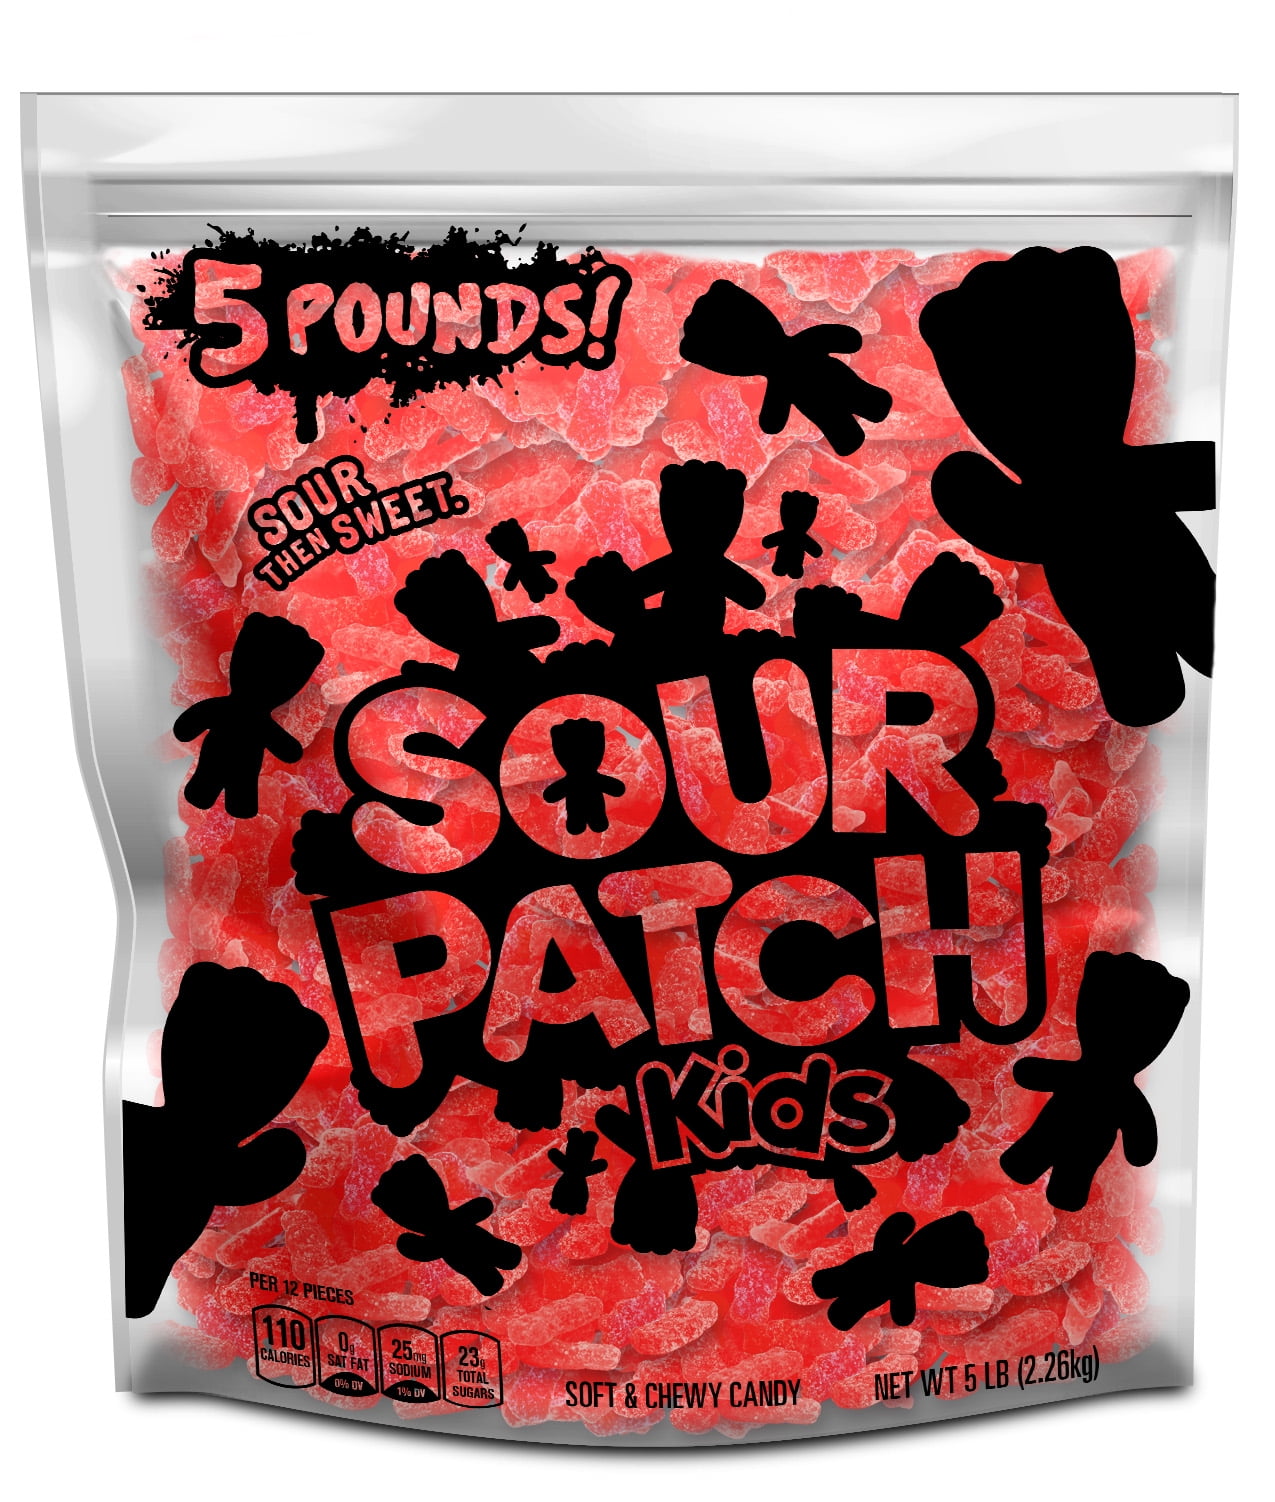 Sour patch kids. Sour Patch Soft and Chewy Candy Kids. Sour Candy конфеты. Кислые конфеты Sour Patch.